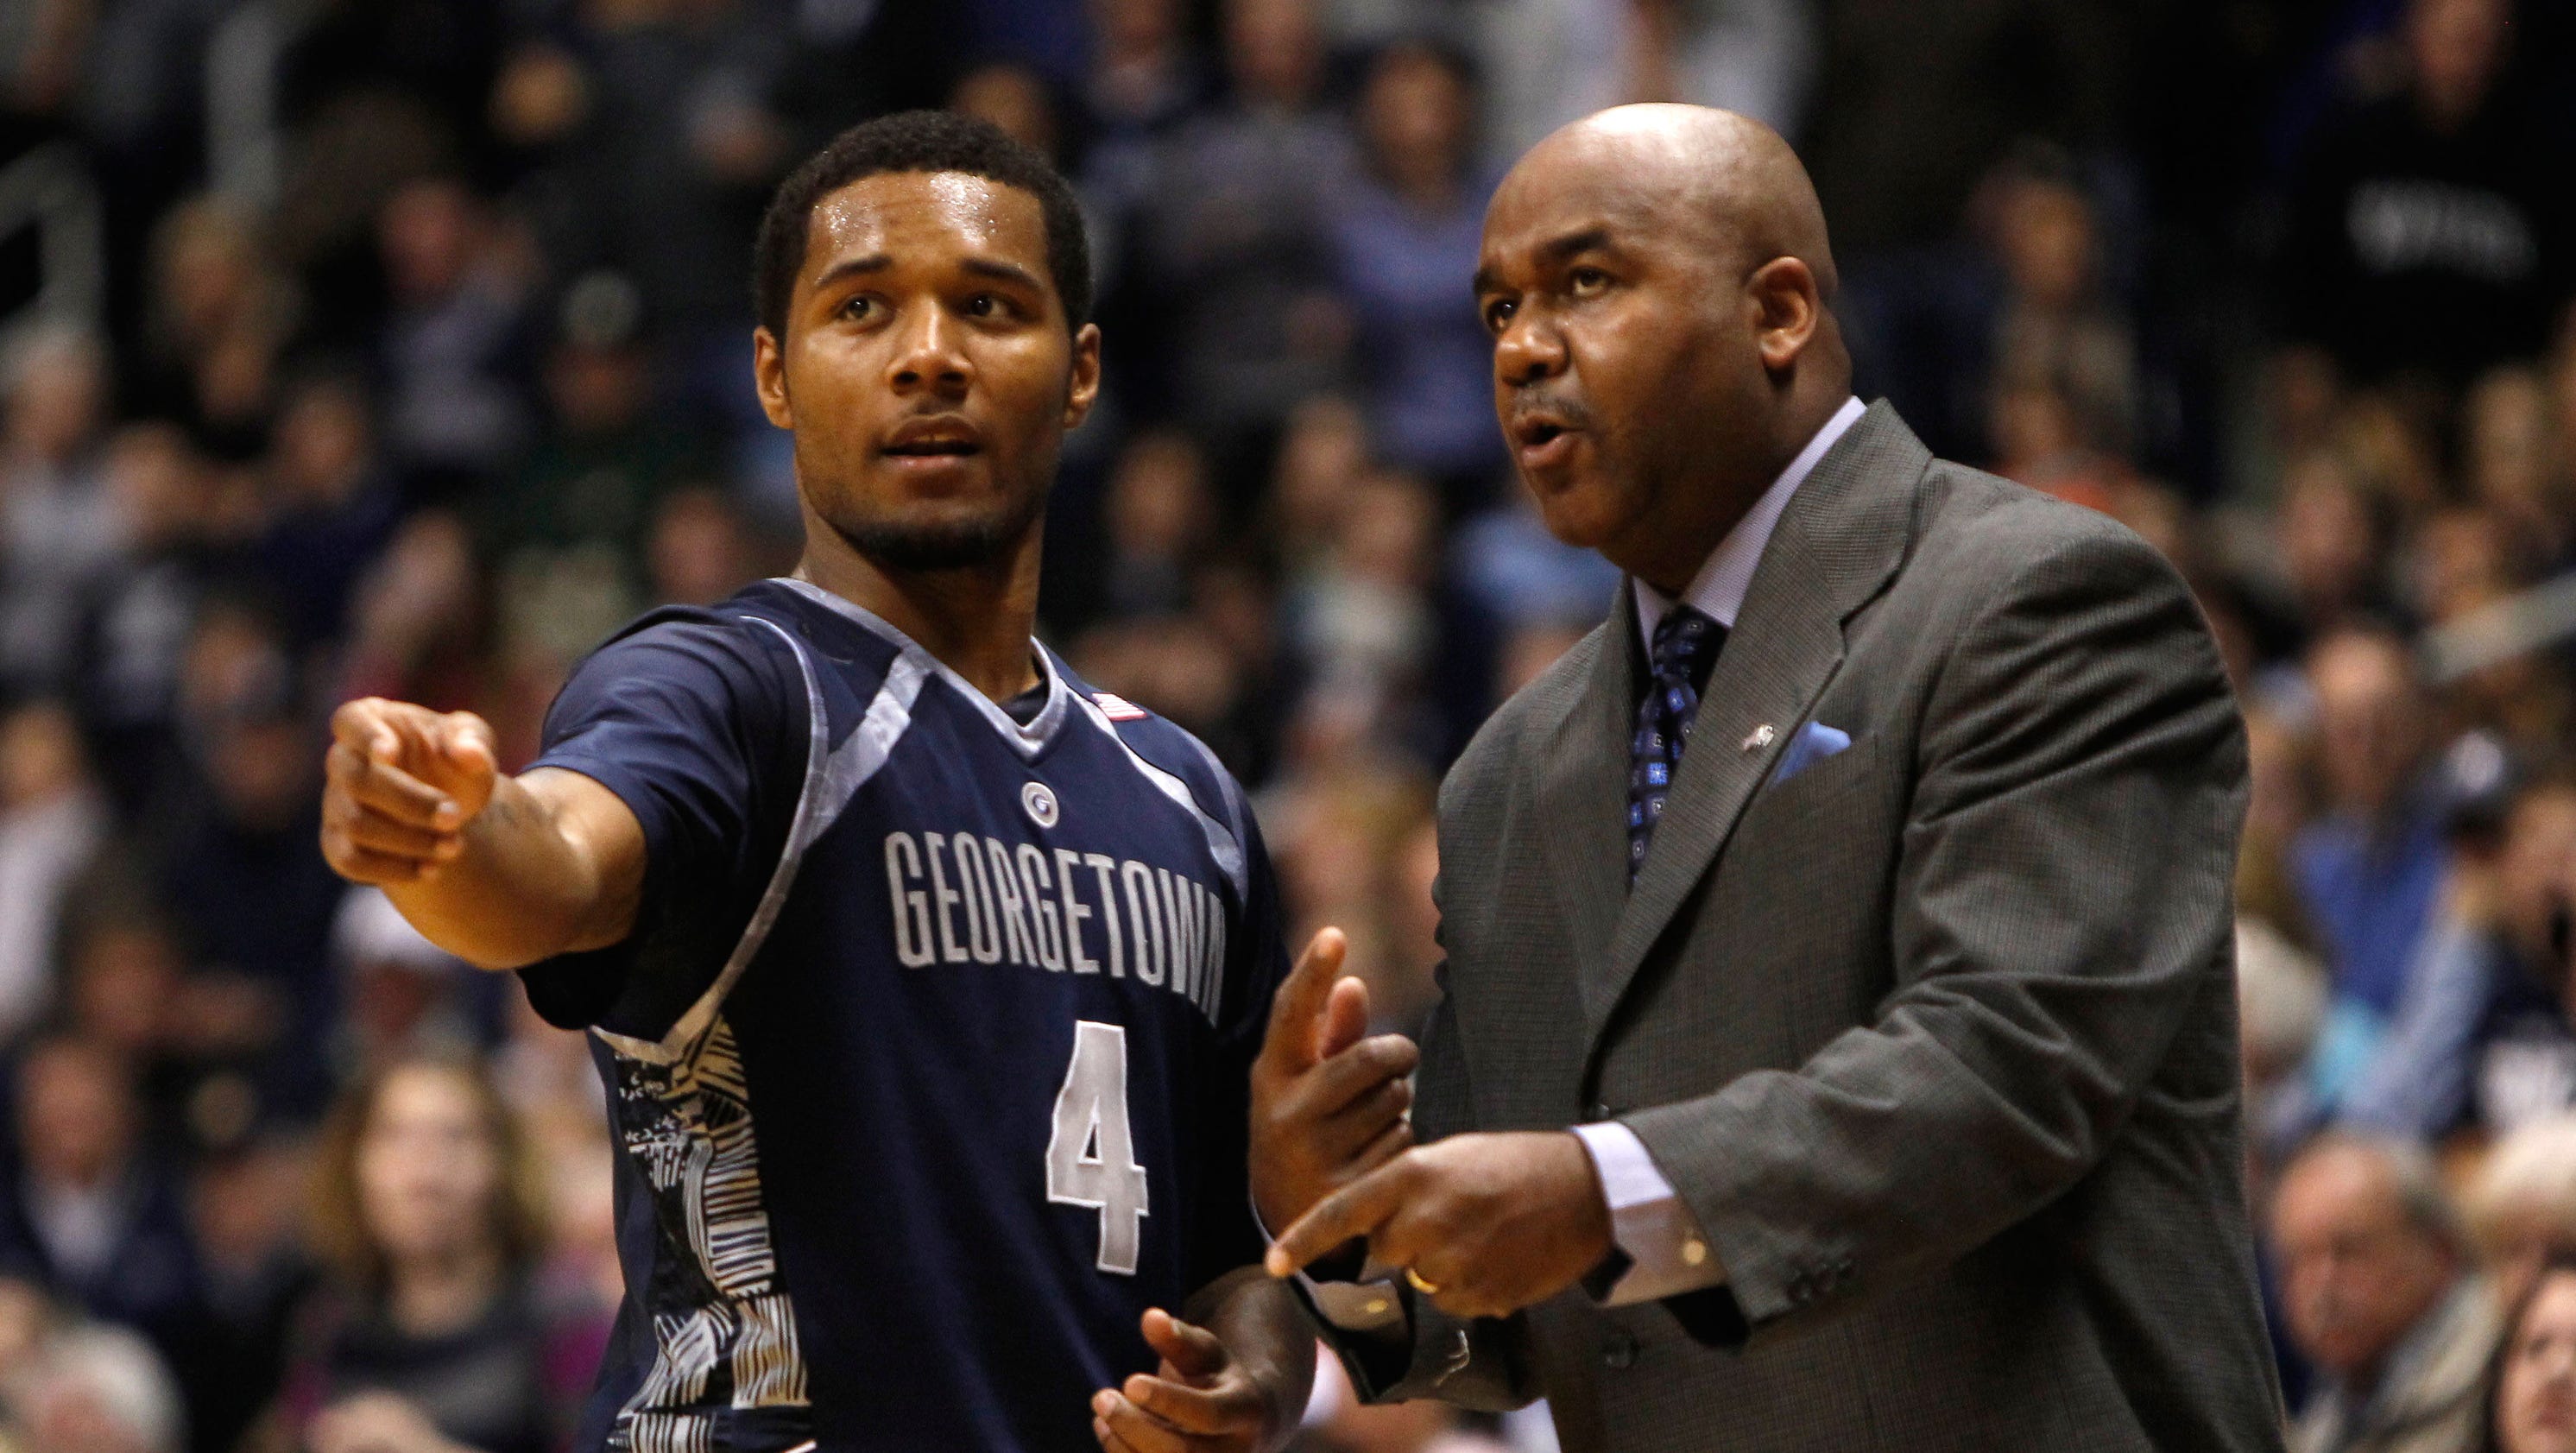 College basketball countdown: No. 37 Georgetown